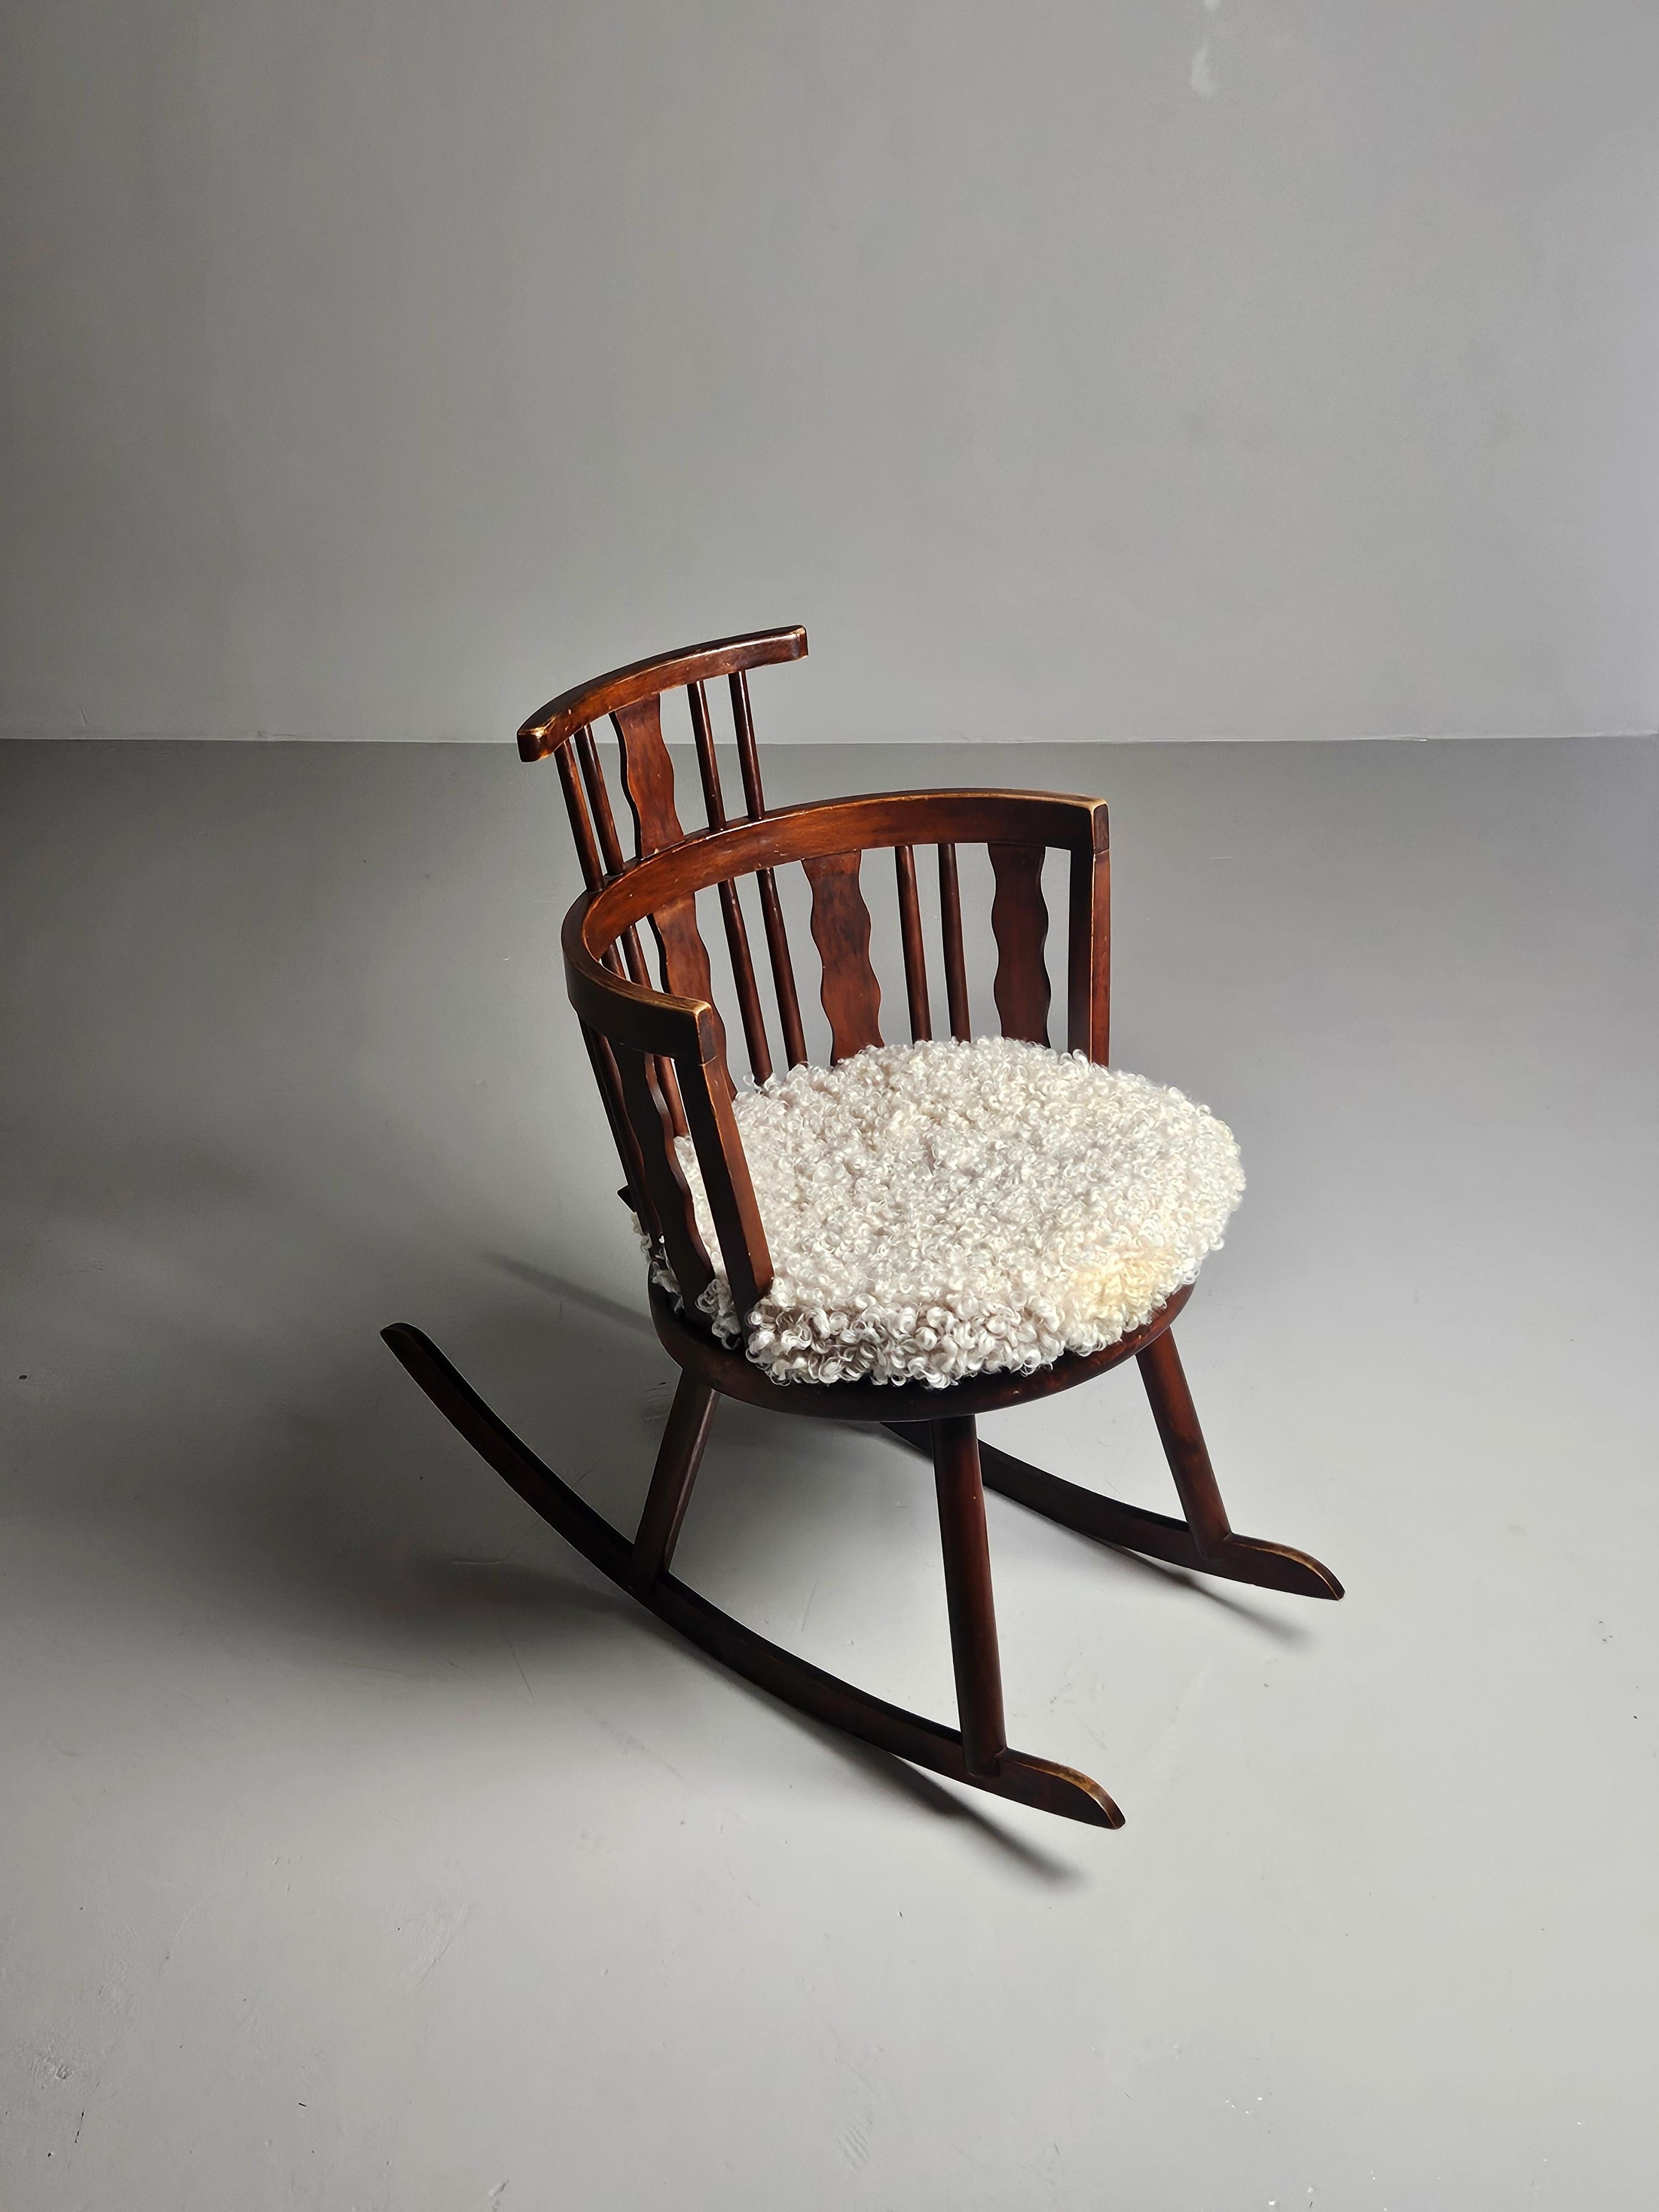 Rare rocking chair designed by Torsten Claeson who was one of the designers at Steneby Hemslöjd in the middle of the 20th century. 

Loose cushion of high quality sheepskin. 

Fits very well with other Swedish sports cabin furniture as those